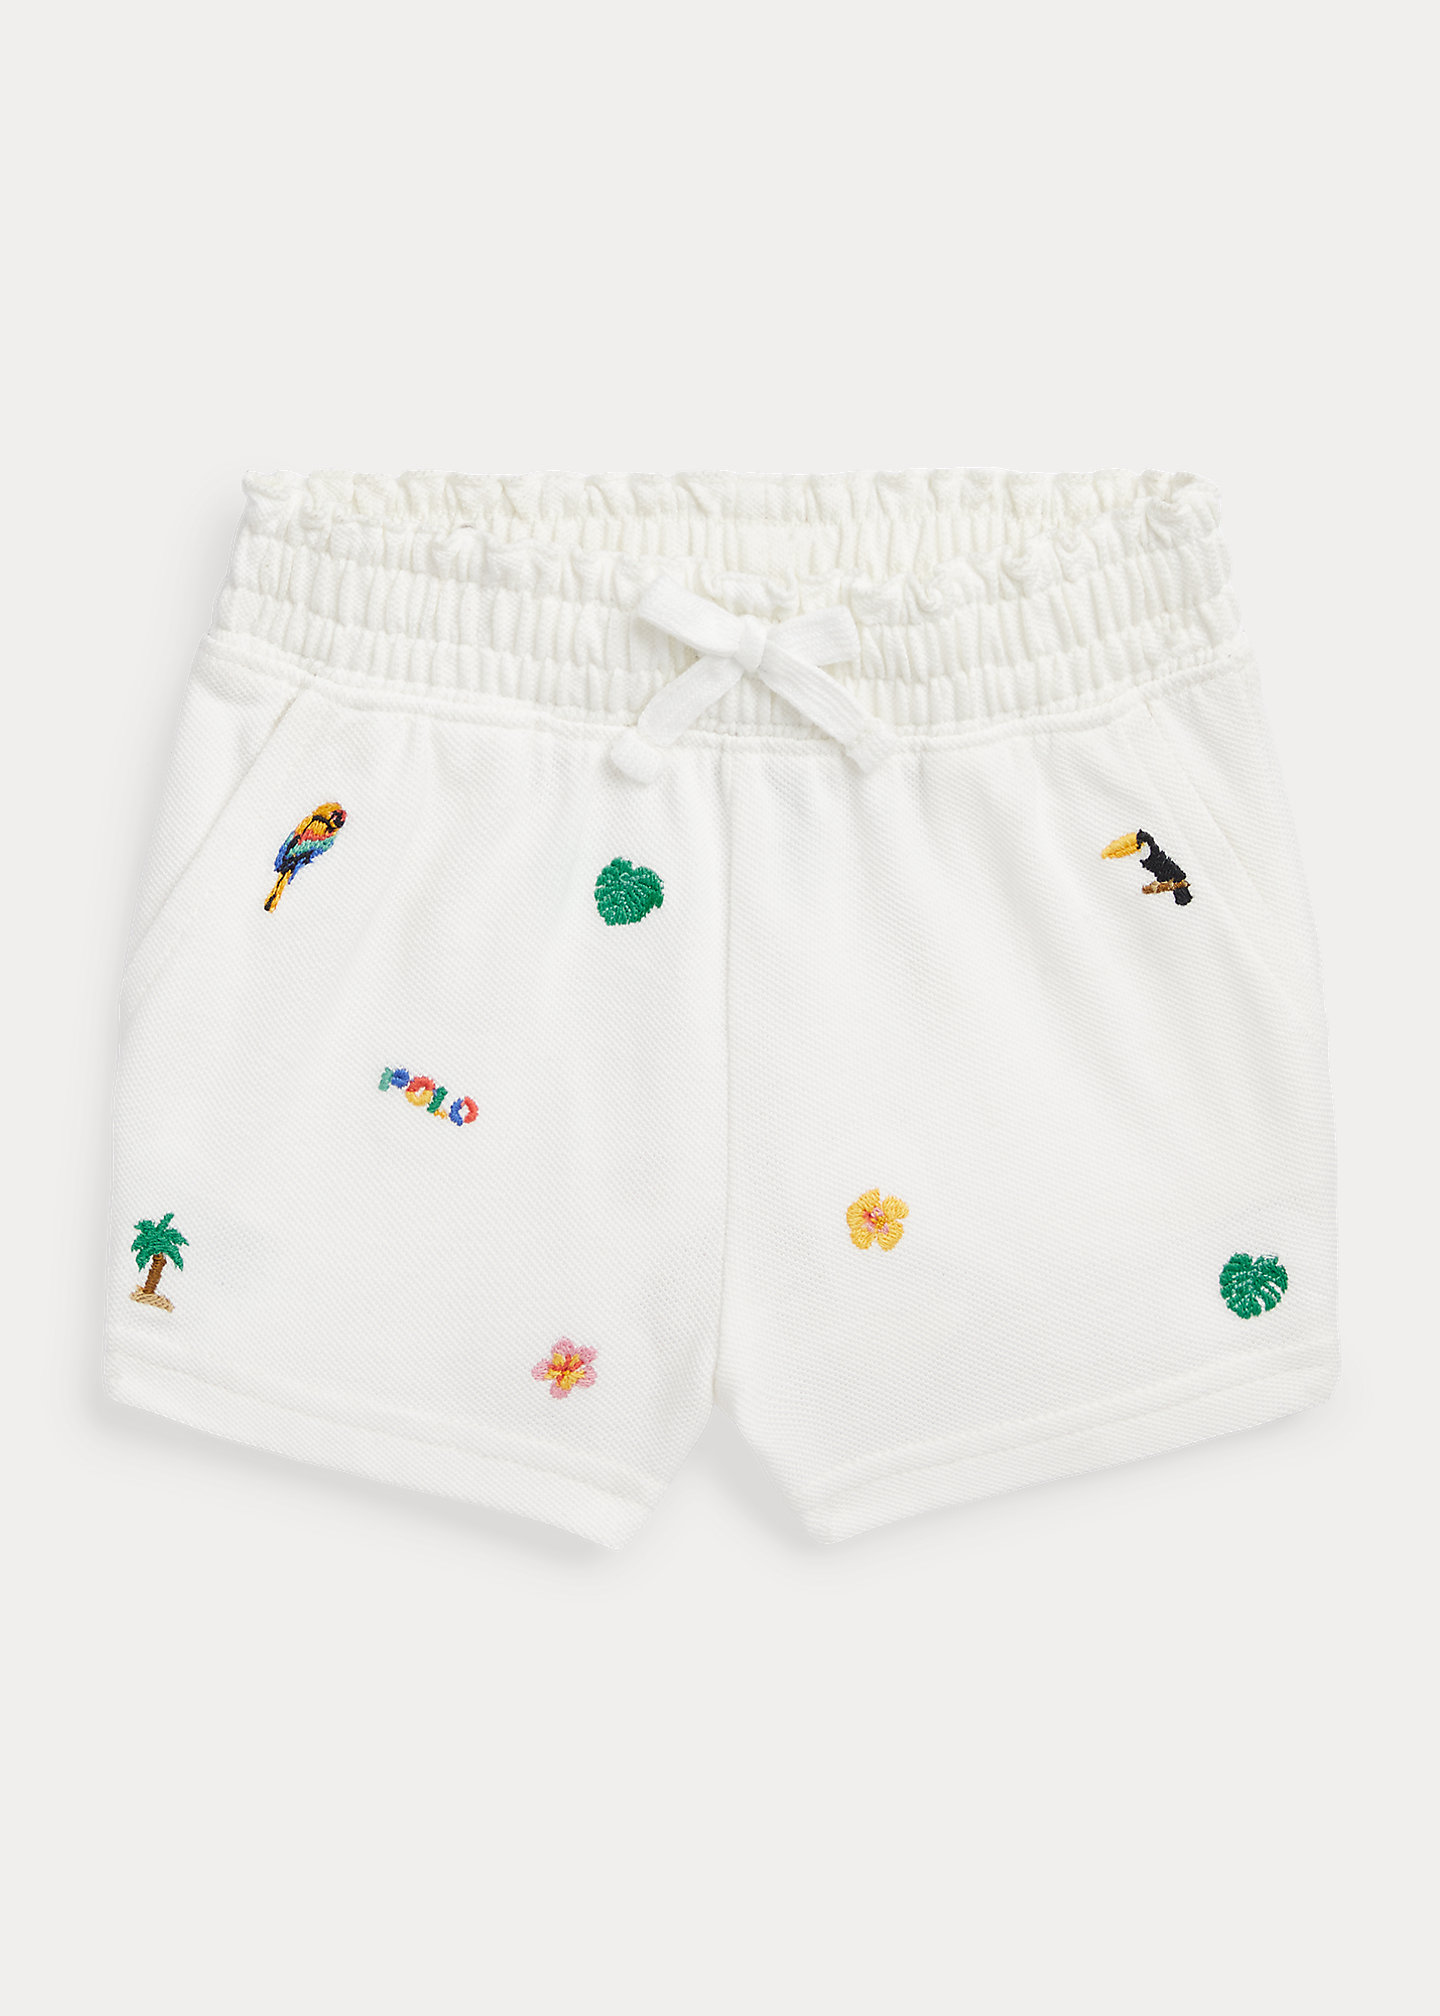 Tropical-Embroidery Mesh Short